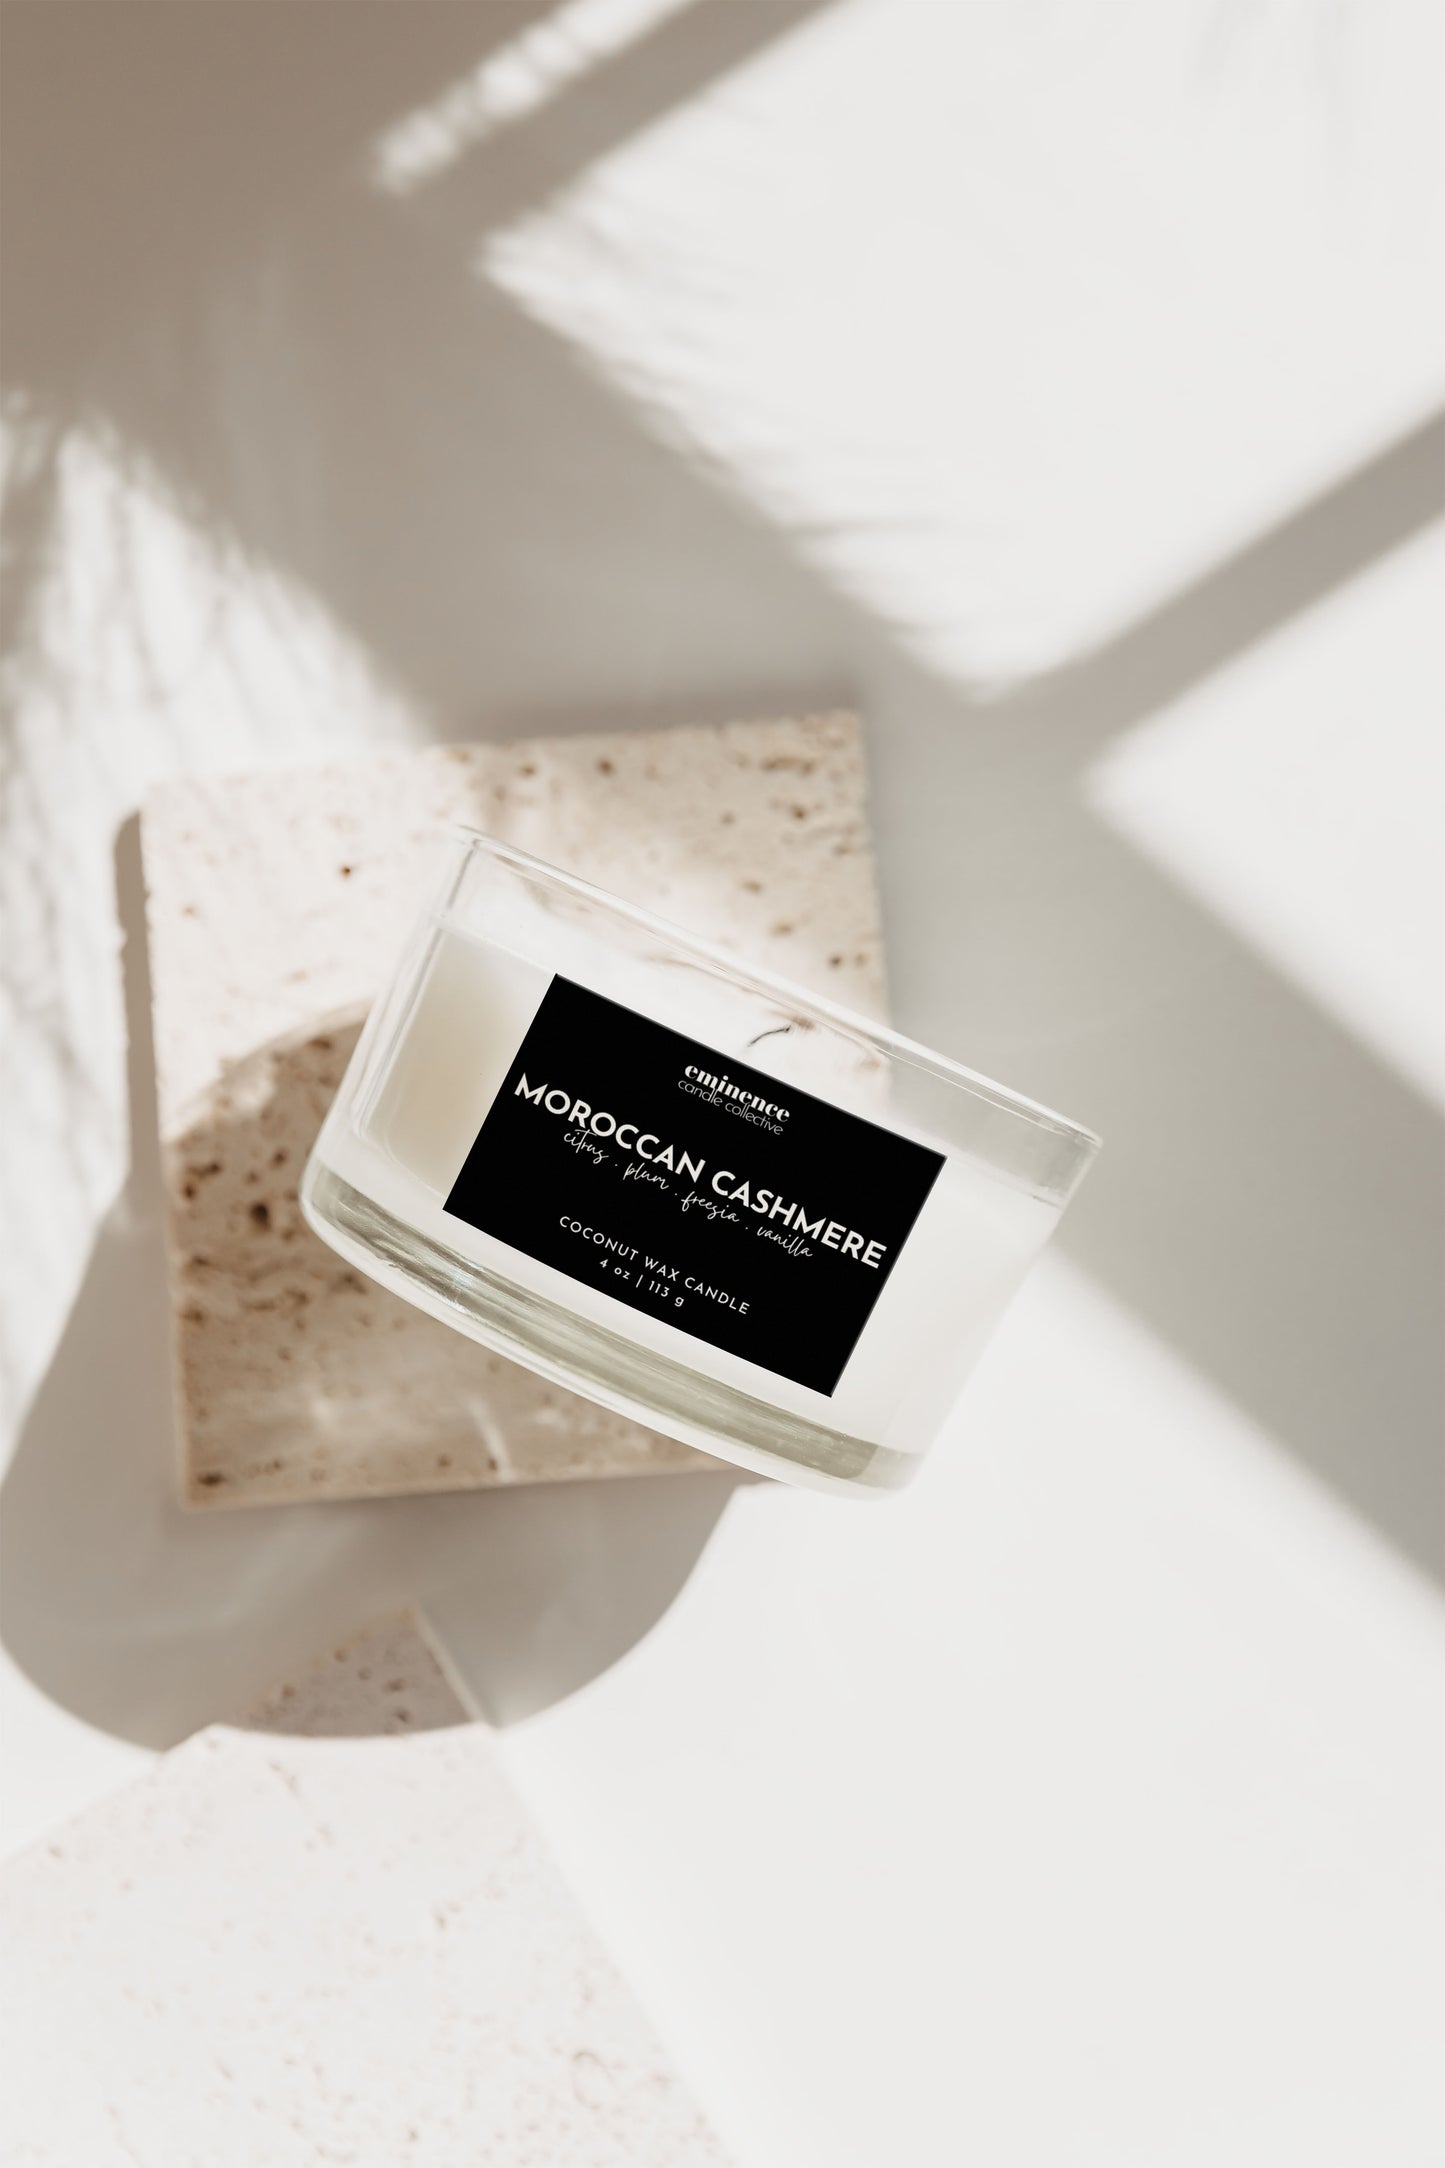 Moroccan Cashmere Candle